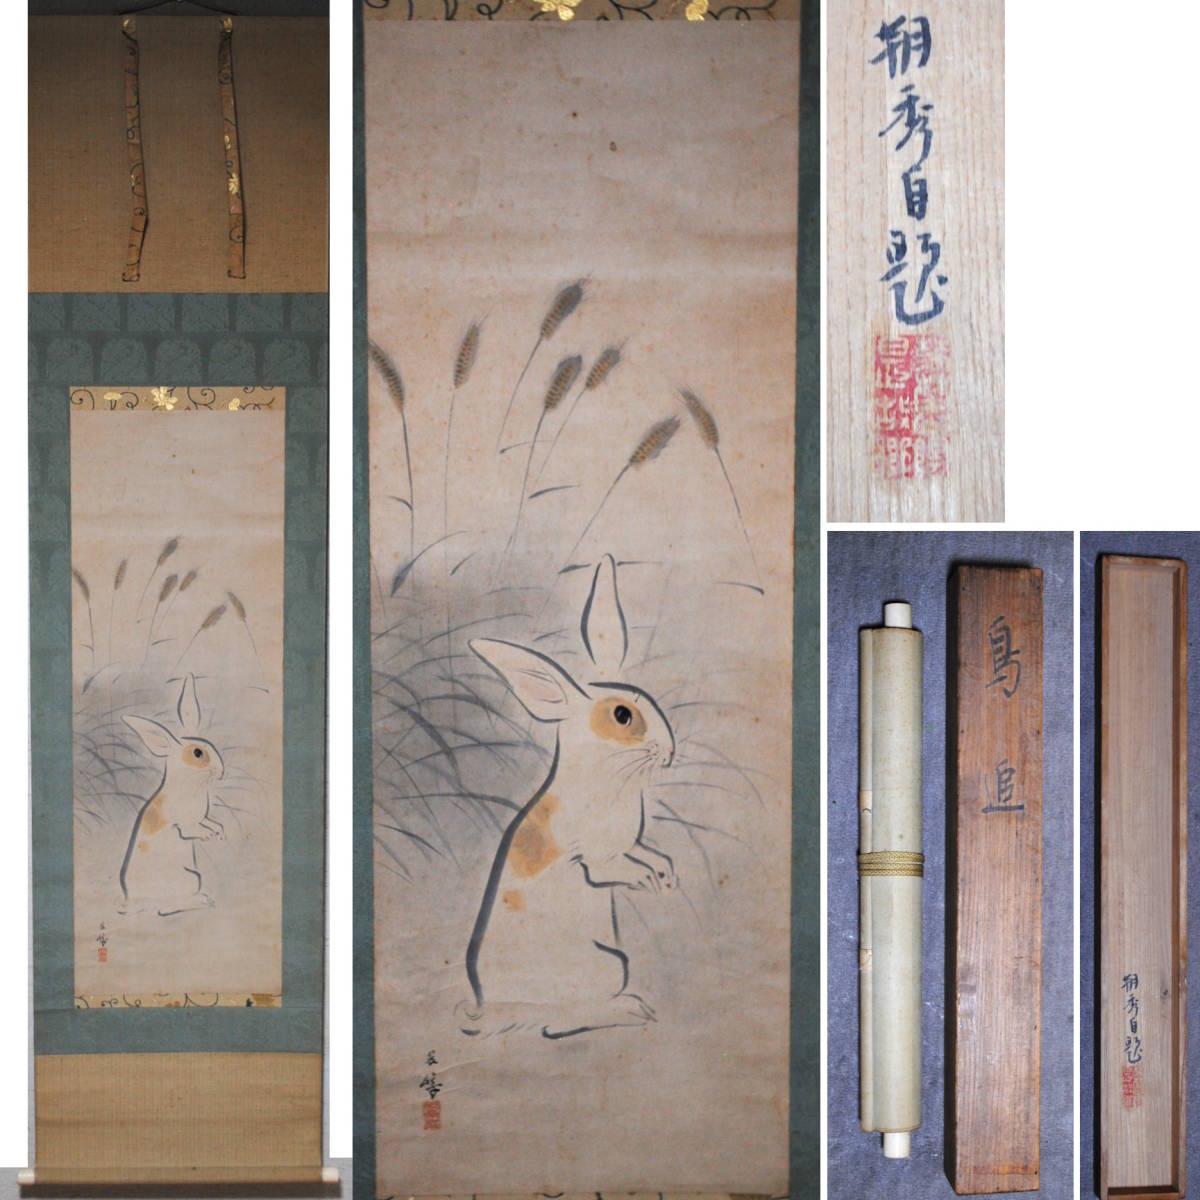 [Sellout Shop] Hanging scroll Torioi Asahide's self-titled work, genuine work, Rabbit, Autumn, hand-painted, hand-written calligraphy, Japanese painting, hanging scroll, from a former family collection, Painting, Japanese painting, Flowers and Birds, Wildlife